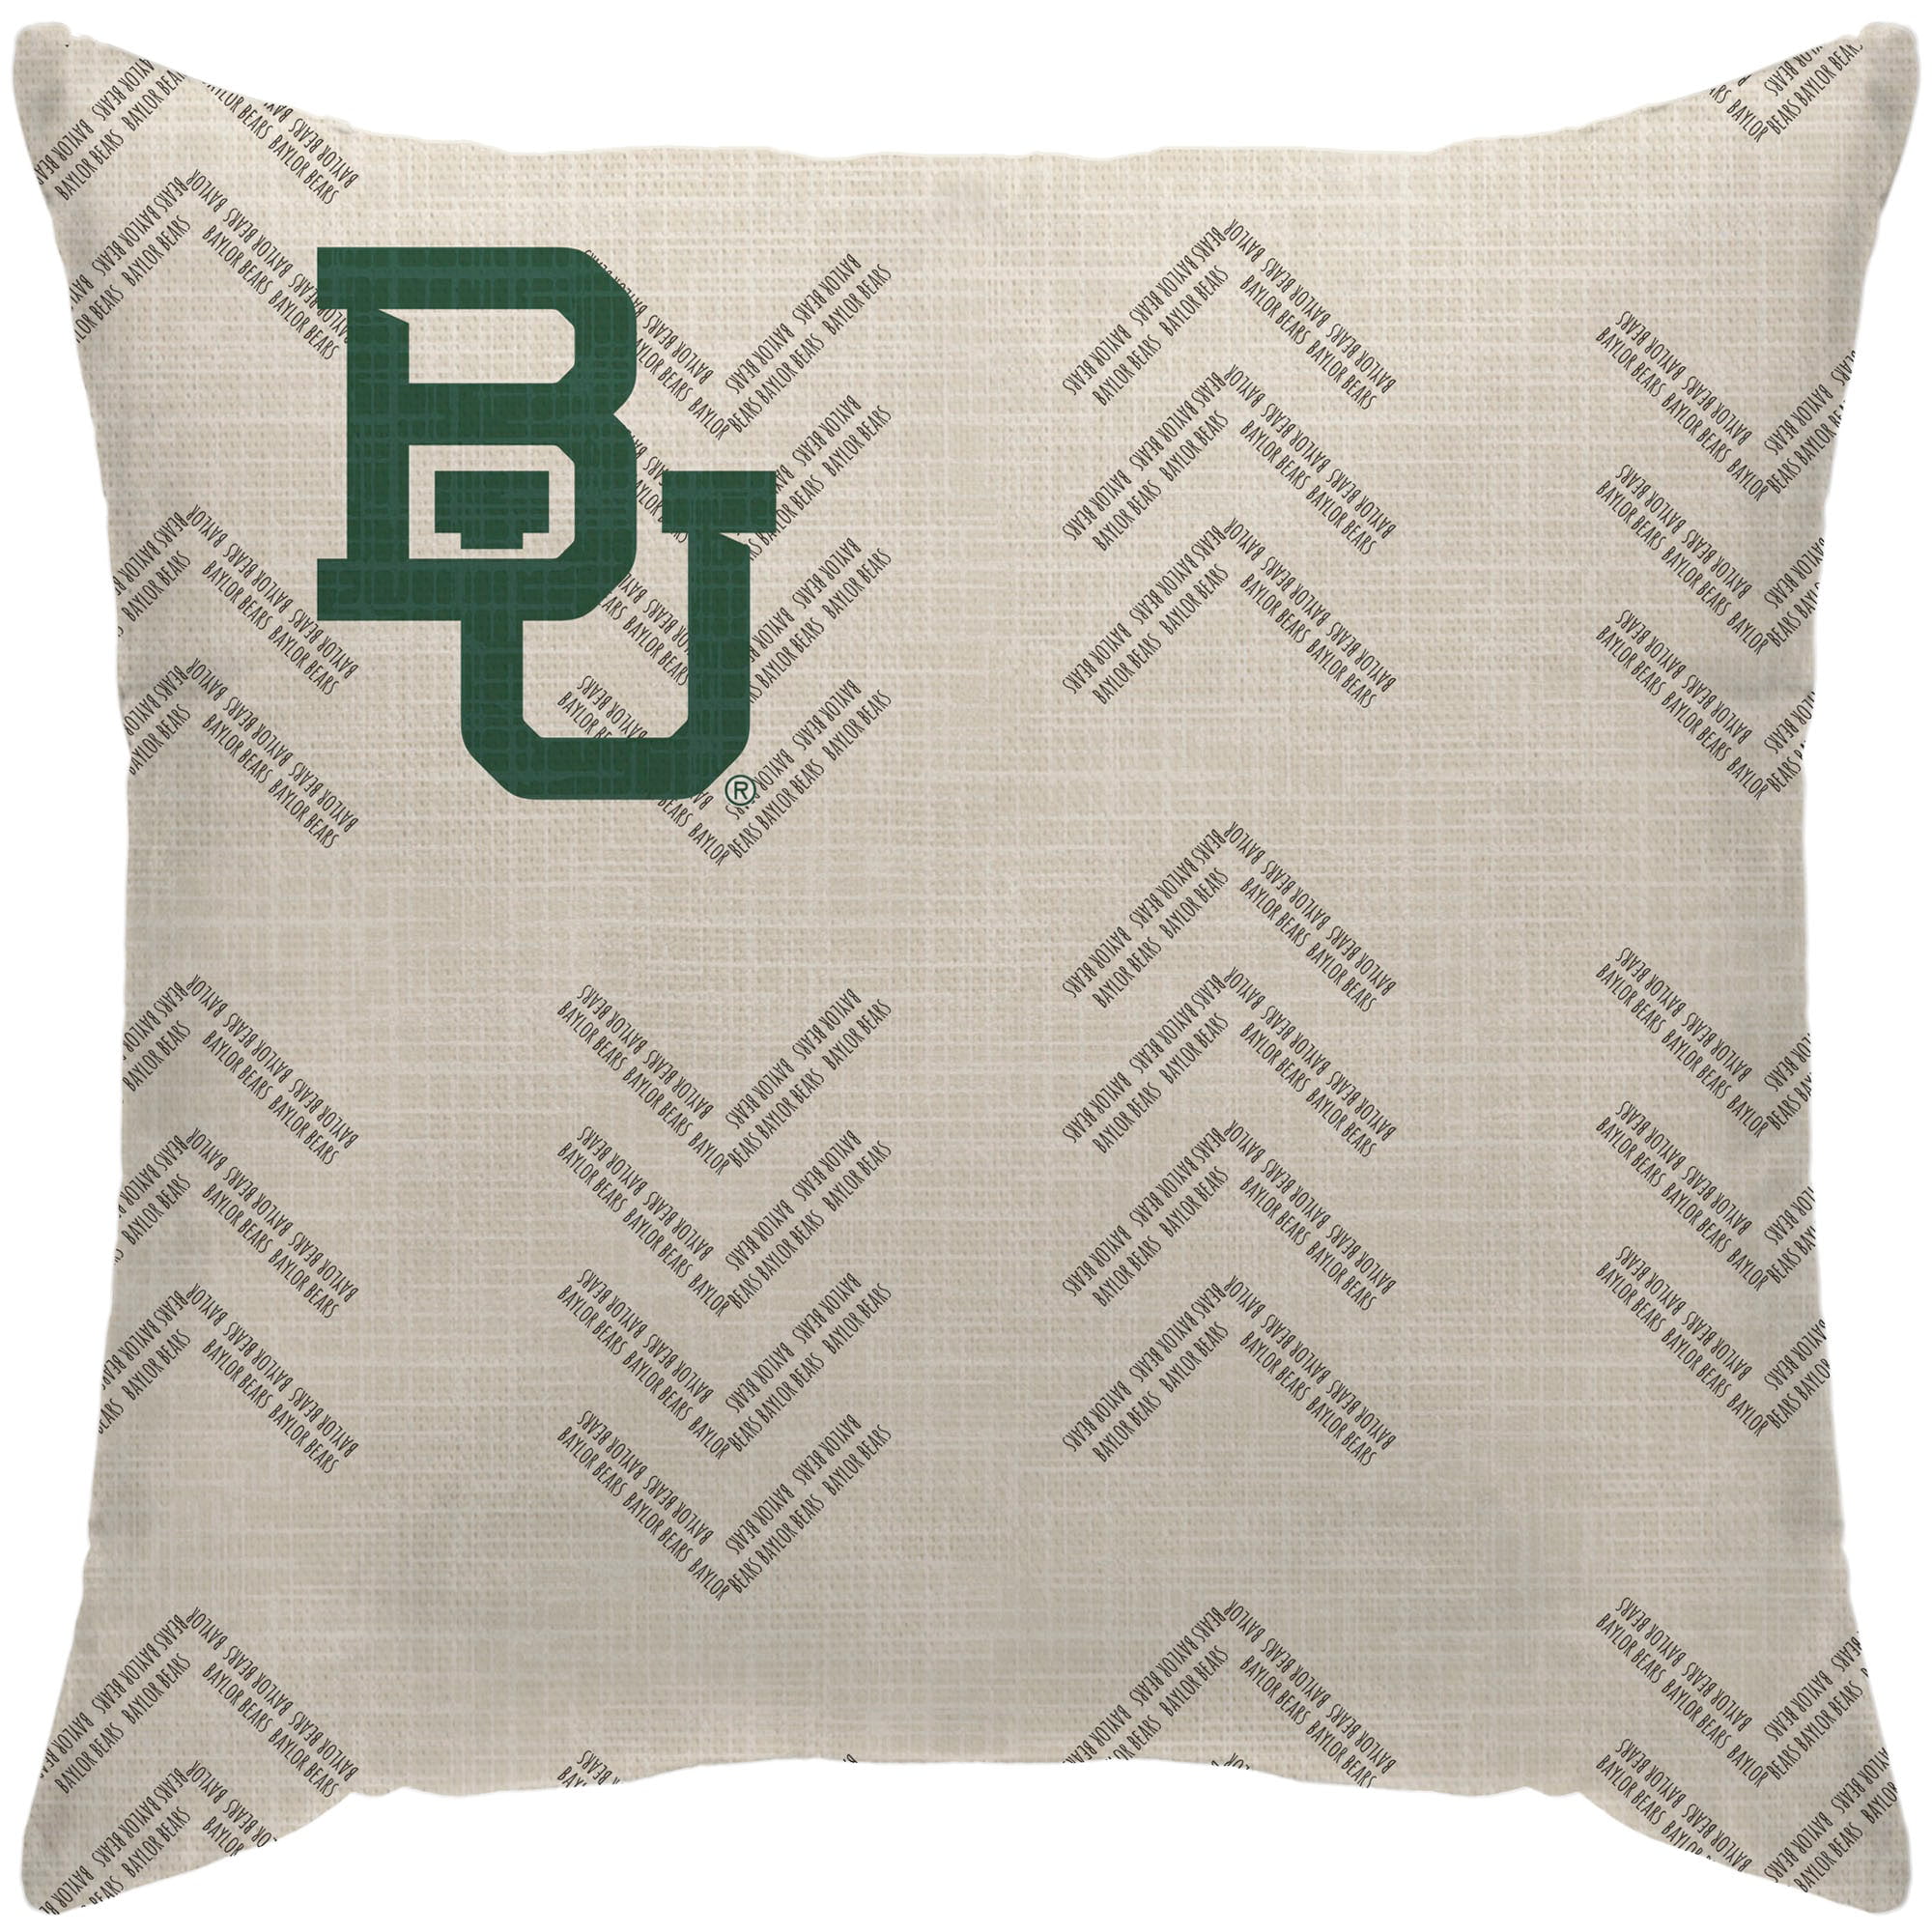 Baylor University Bears 16 x 16 Flannel Pillow Cover/College Team 